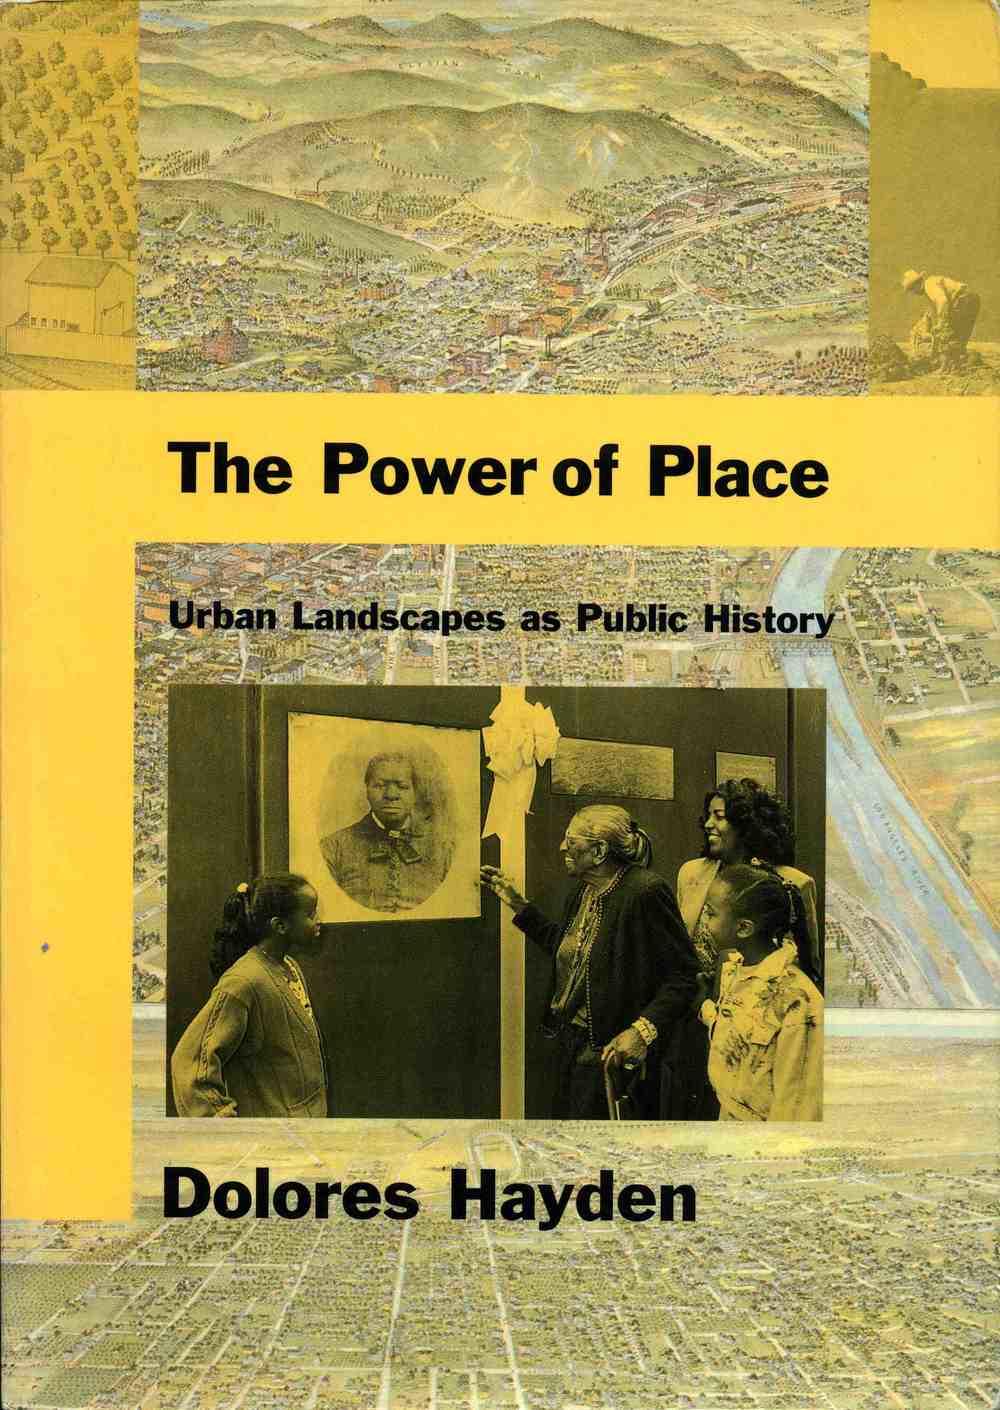 Cover of the book "The Power of Place: Urban Landscapes as Public History" by Dolores Haden. Cover is yellow, showing an illustration of various landscapes.